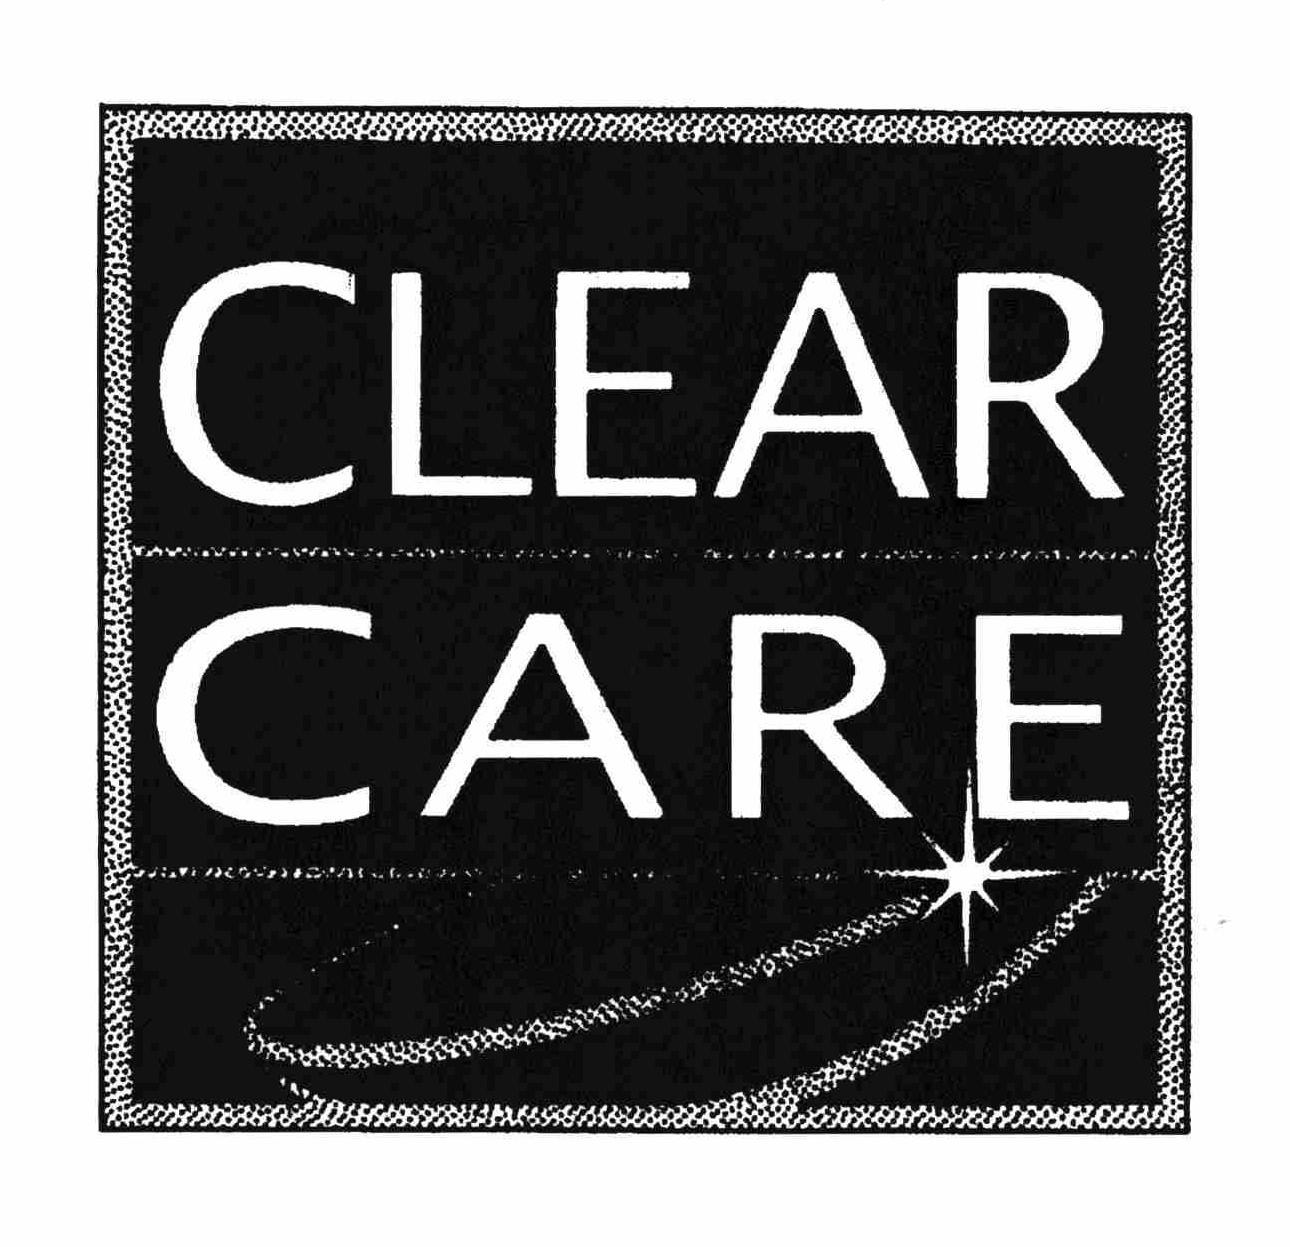 CLEAR CARE